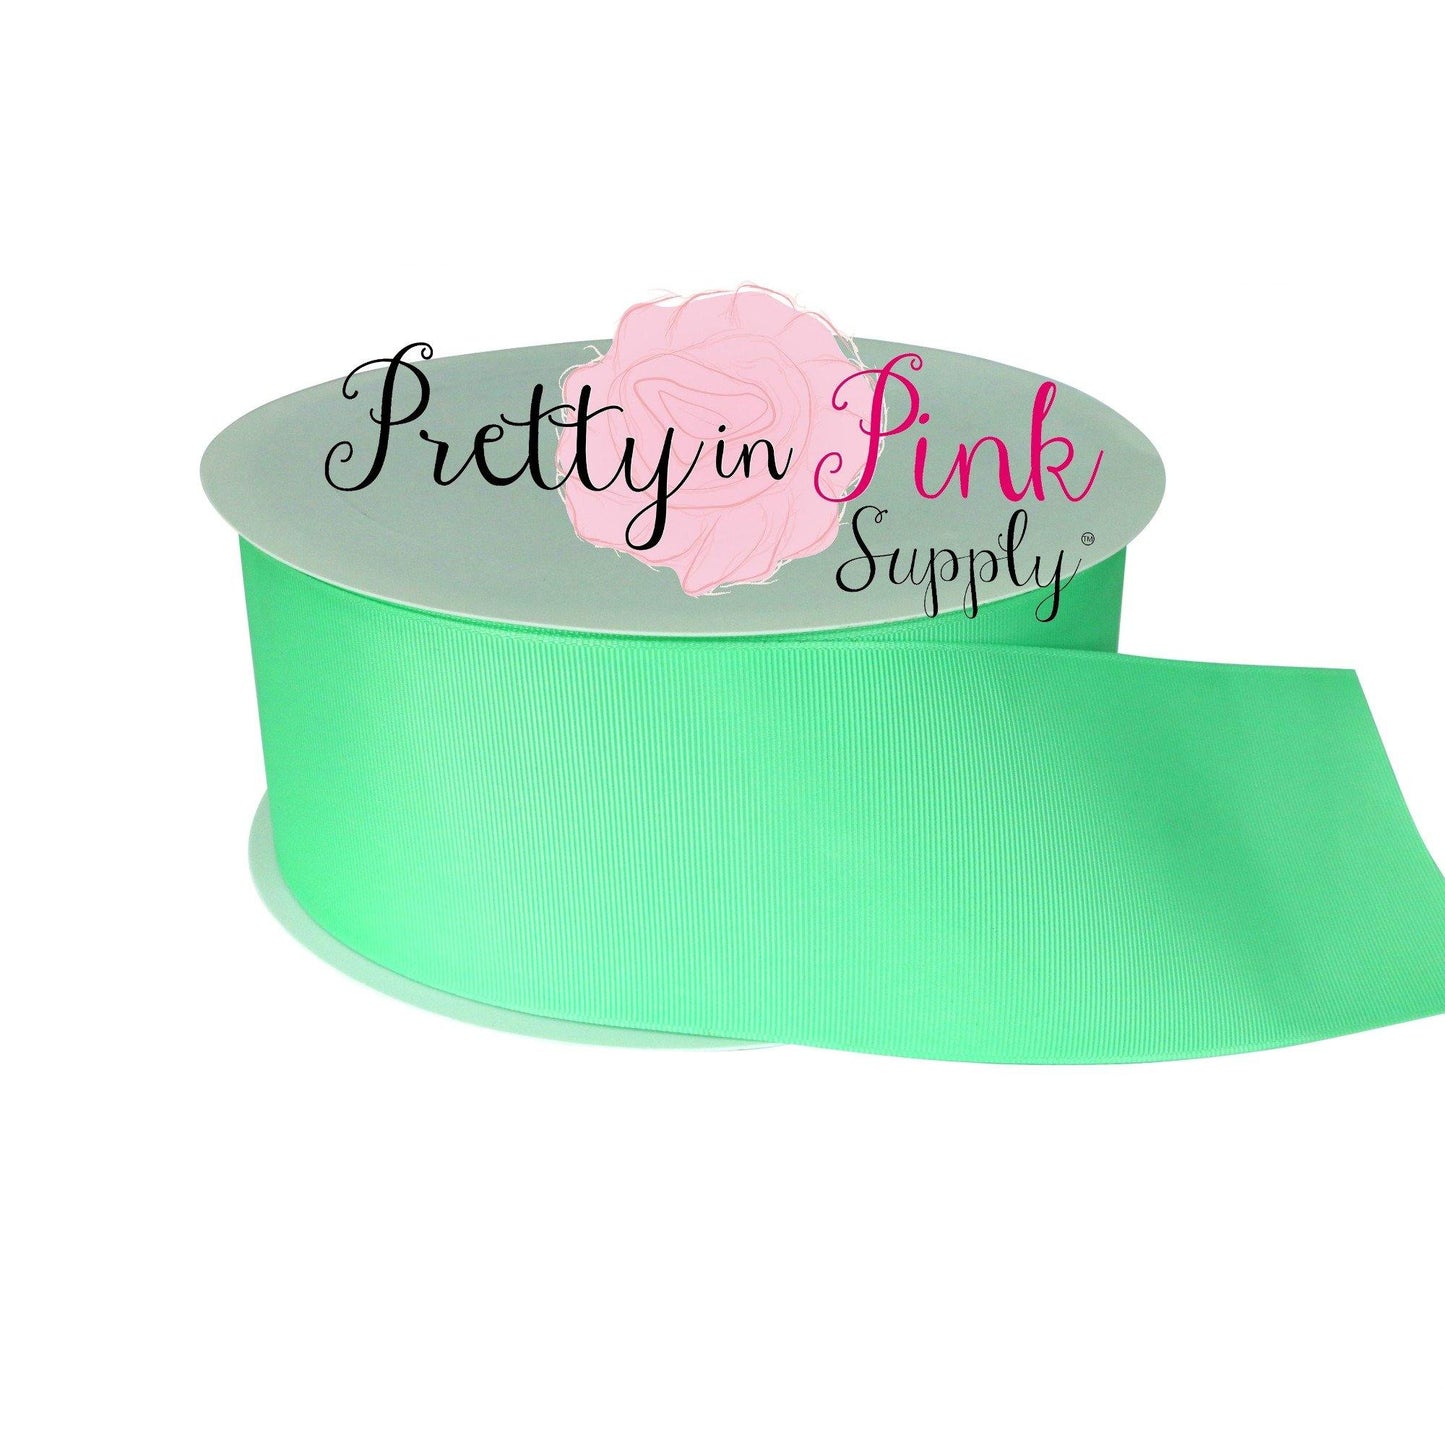 3" SOLID Mint Grosgrain RIBBON - Pretty in Pink Supply